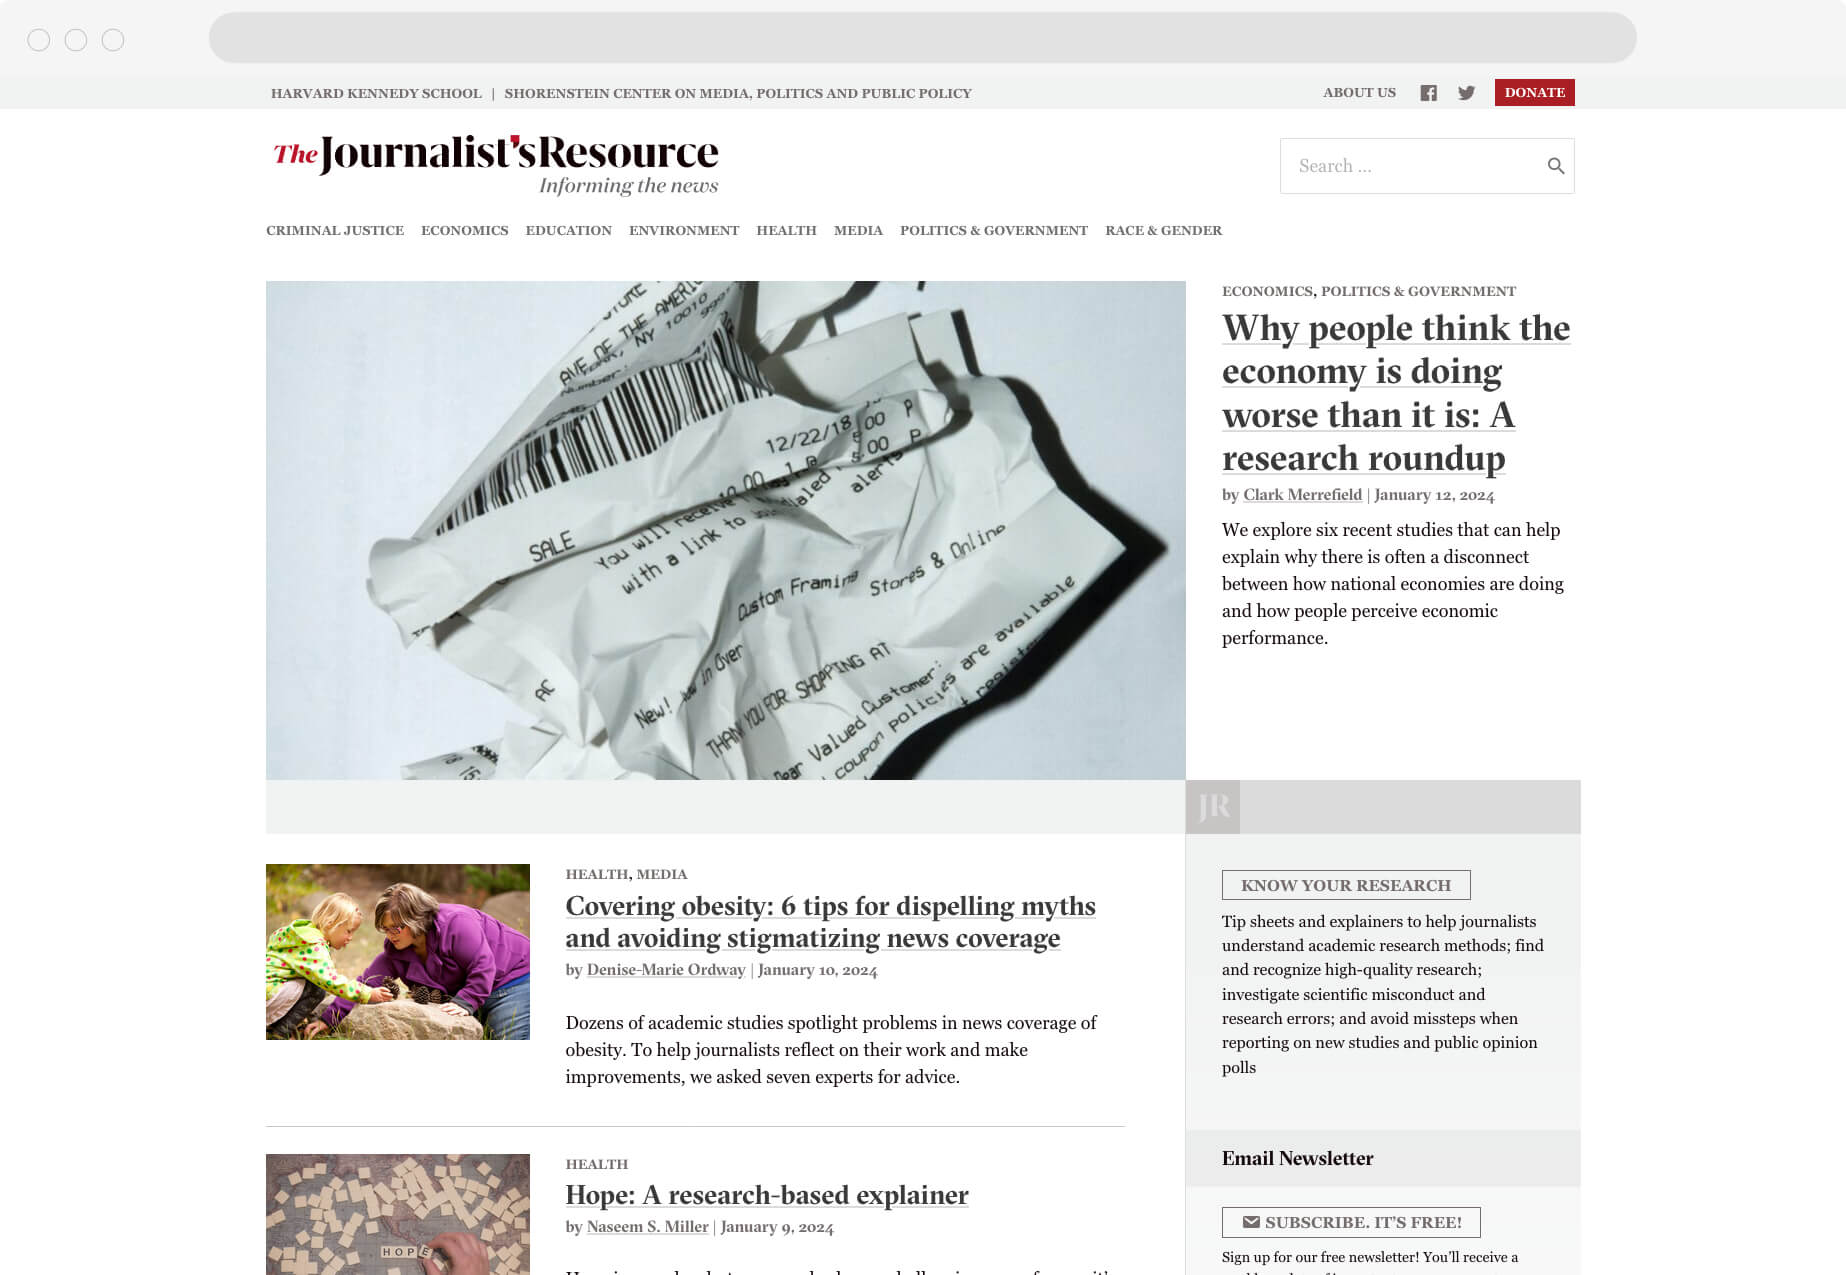 A homepage with a featured story "Why people think the economy is doing worse than it is: A research roundup" and an image of a crinkled receipt. 